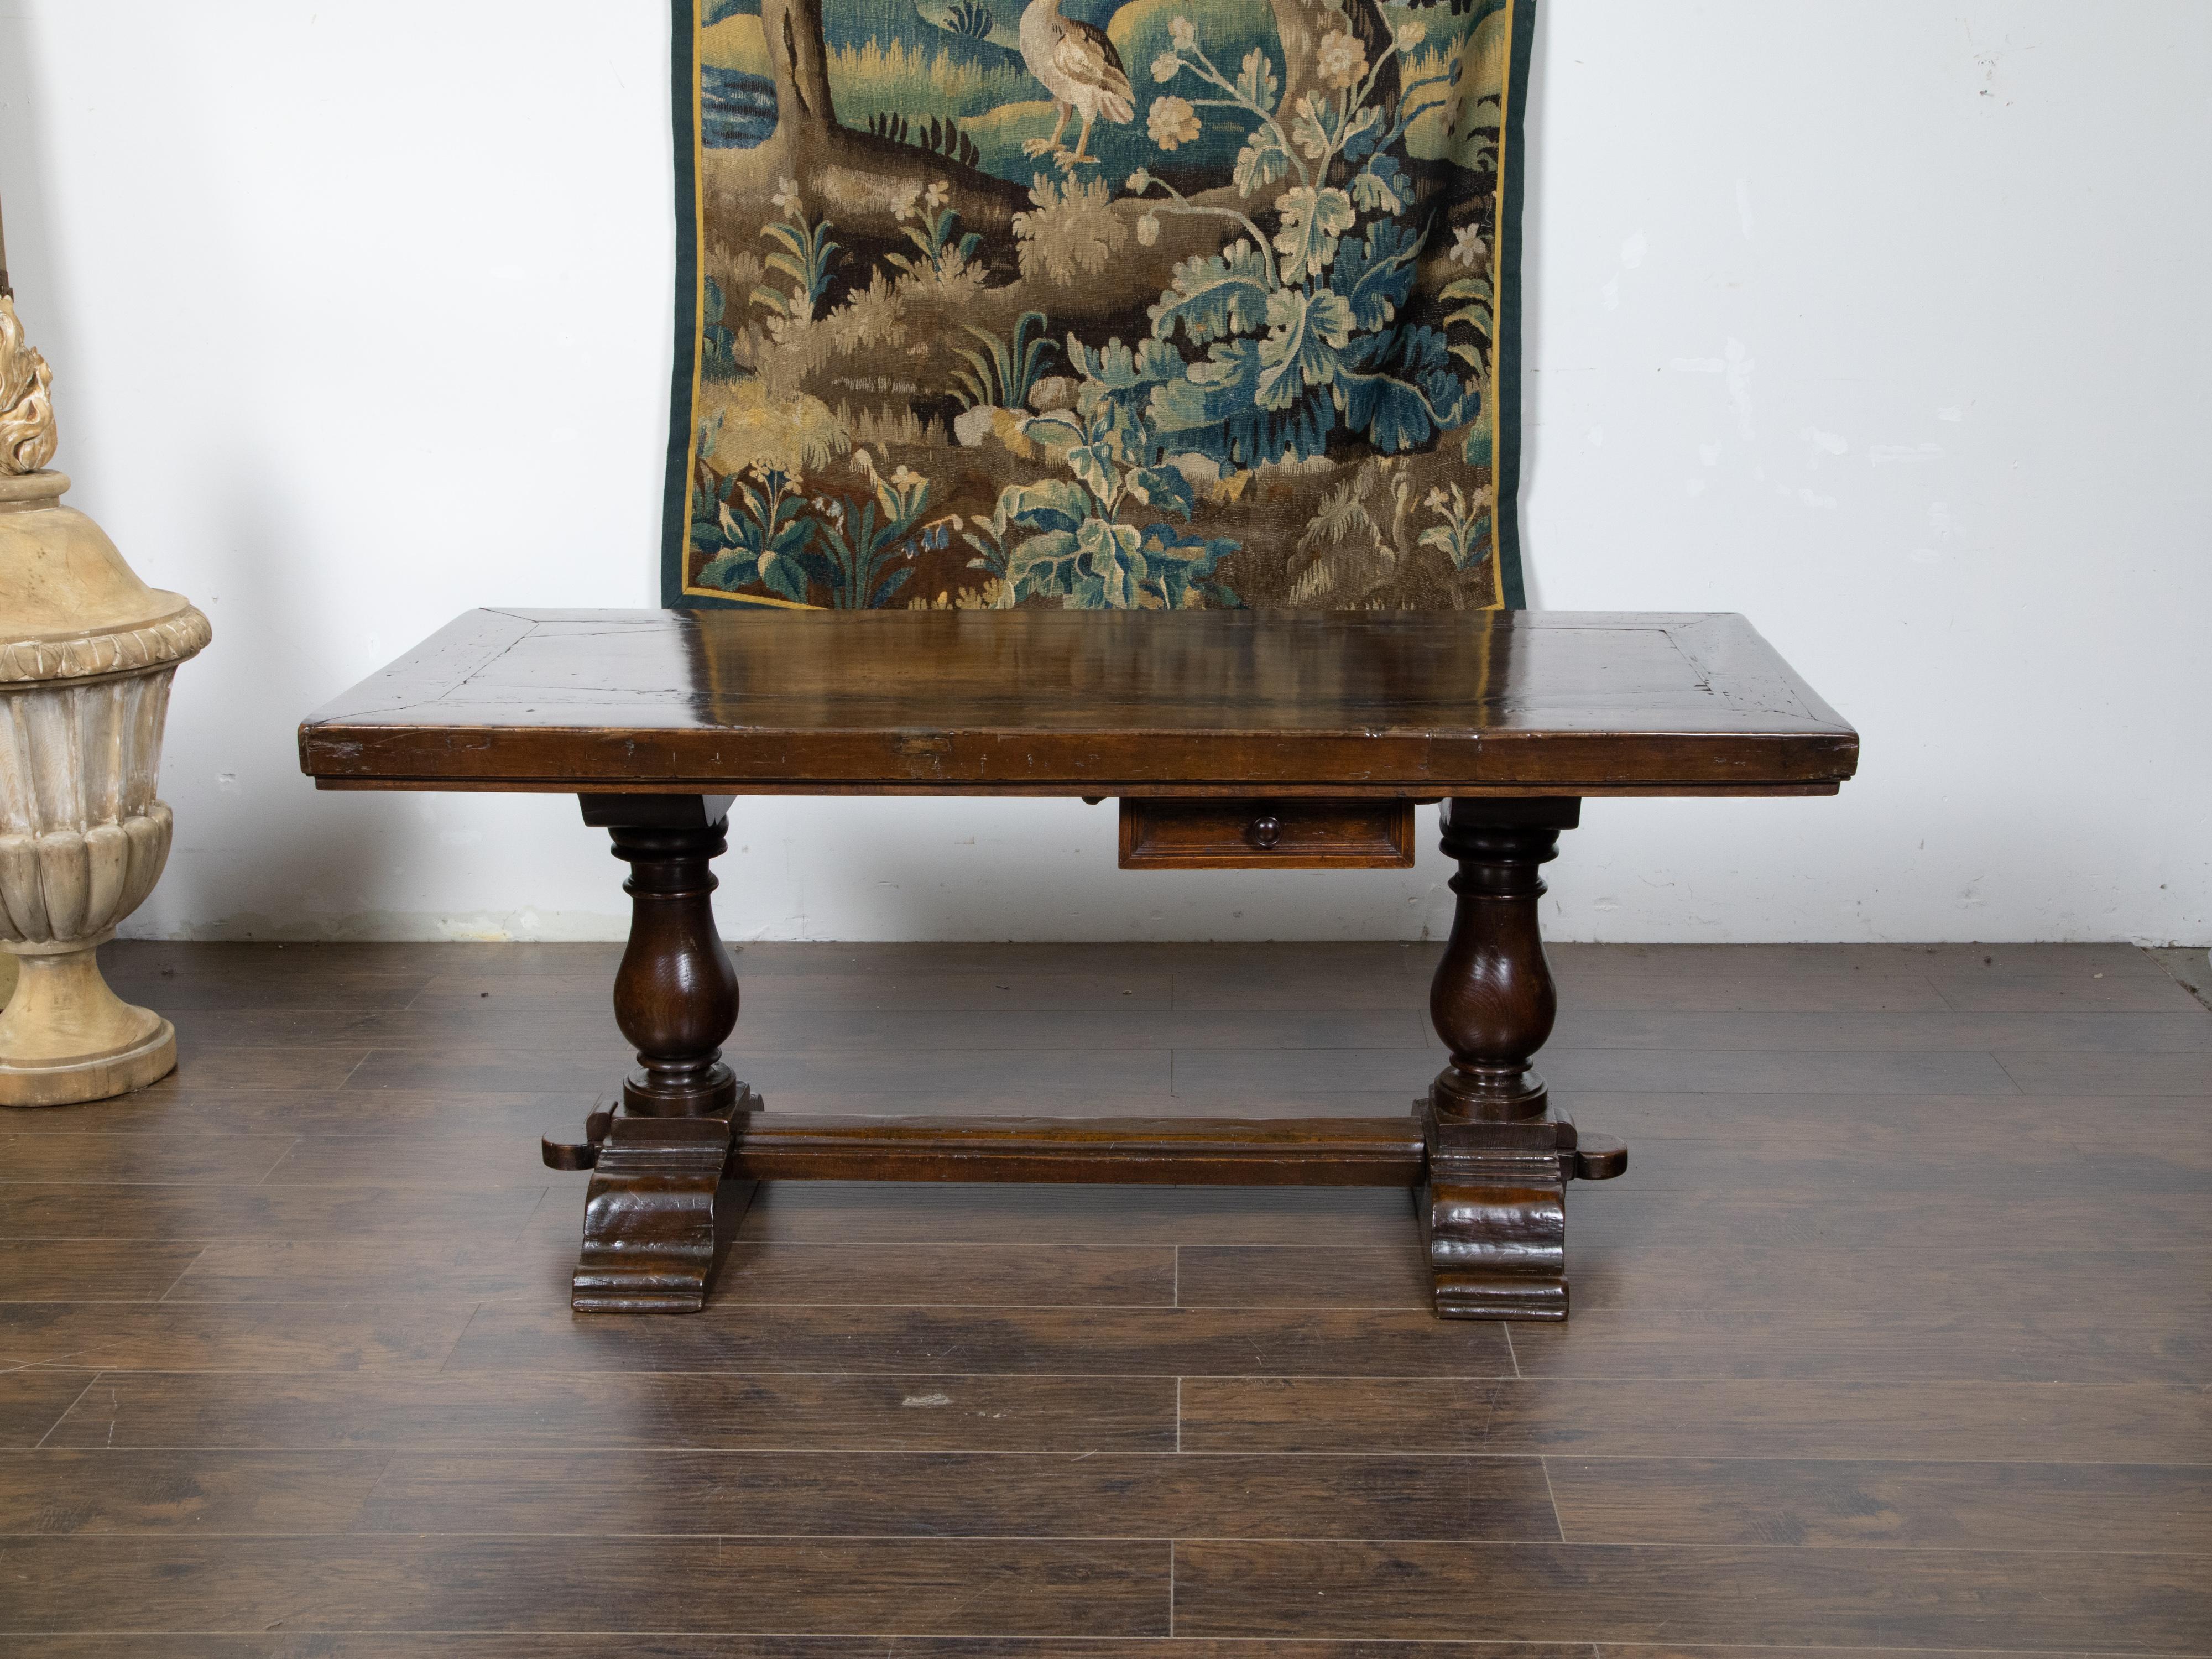 An Italian walnut table from the 19th century, with trestle base, turned legs, cross stretcher and single drawer. Created in Italy during the 19th century, this walnut table features a rectangular top with nicely weathered appearance, sitting above